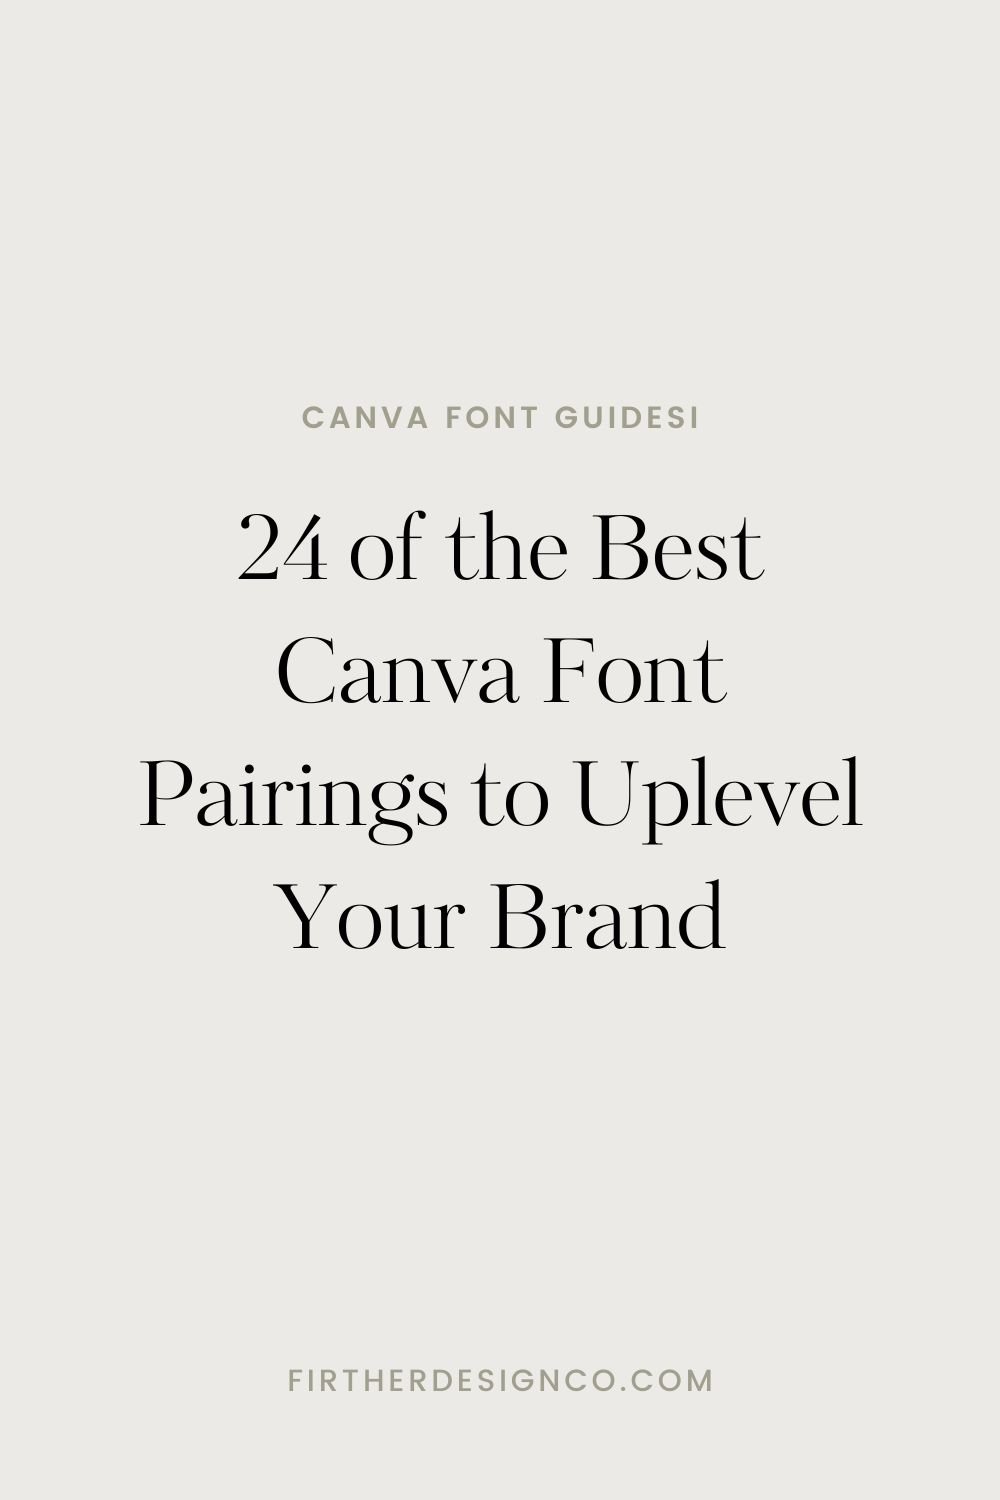 24 Of The Best Canva Font Pairings To Uplevel Your Brand — Firther